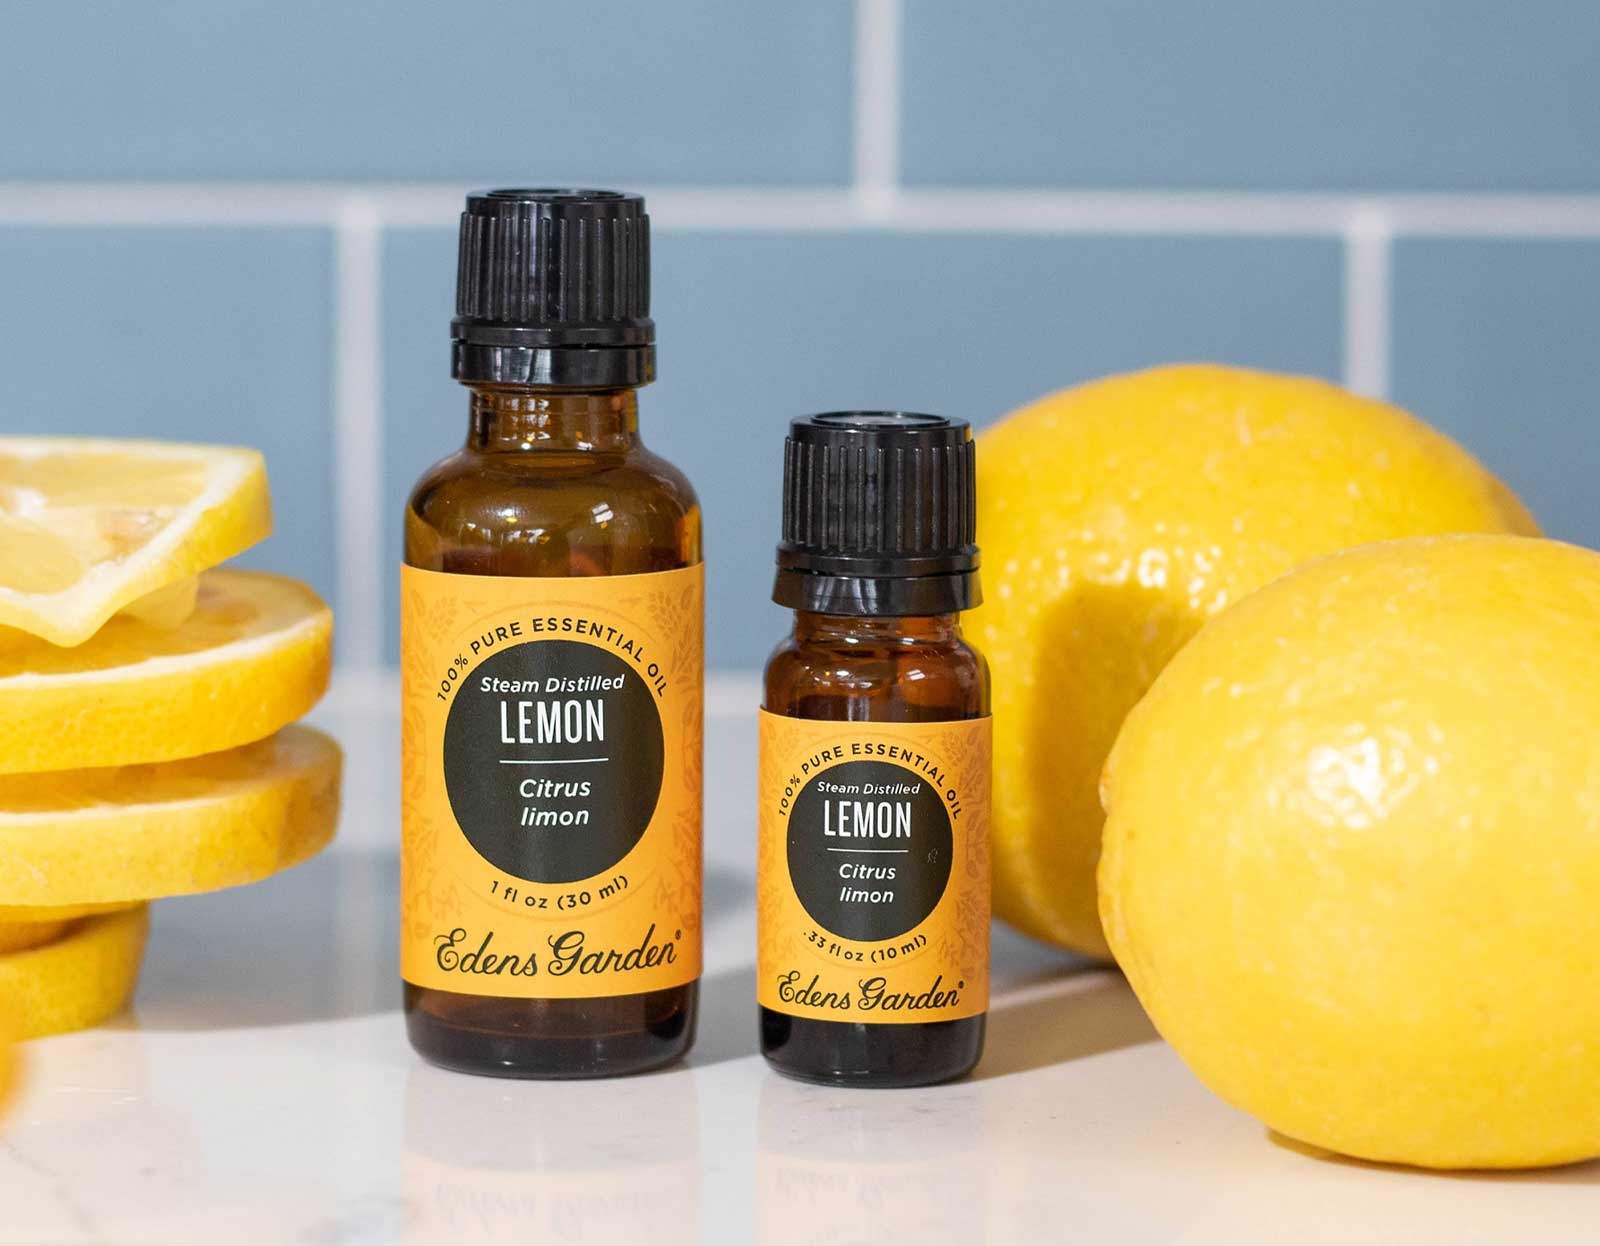 How can 2 small drops of lemon essential oil be the same as